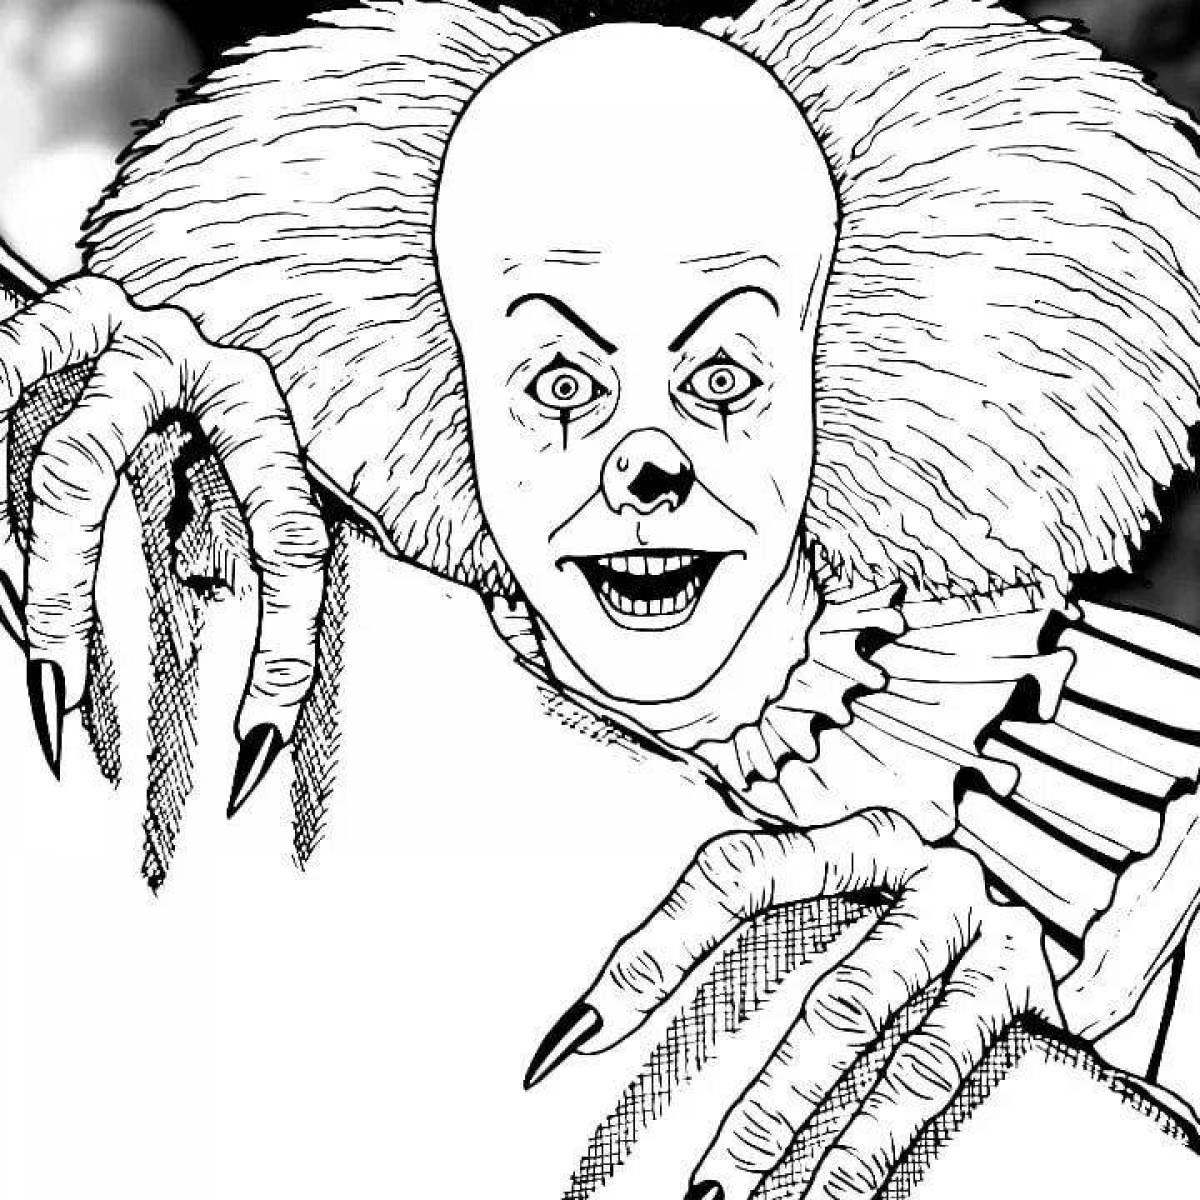 Pennywise the clown scary coloring book